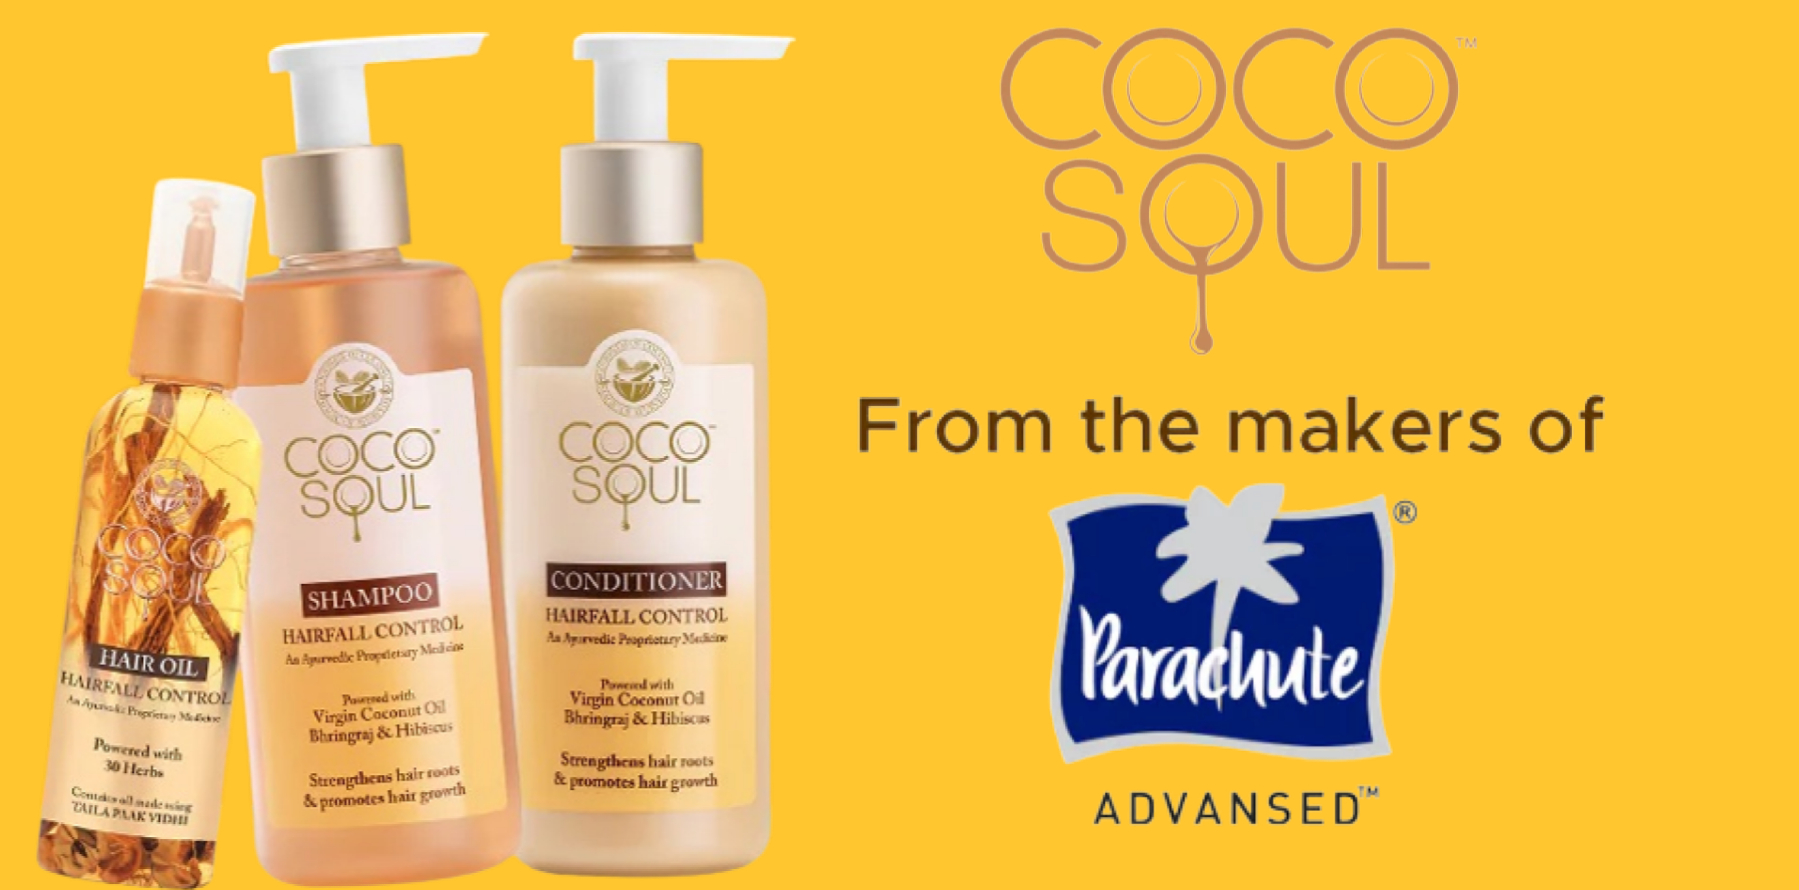 Cocosoul from the Manufaturere of Parachute advance get at Pixies.in at Flat 25% off online at Pixies.in Chennai, INDIA